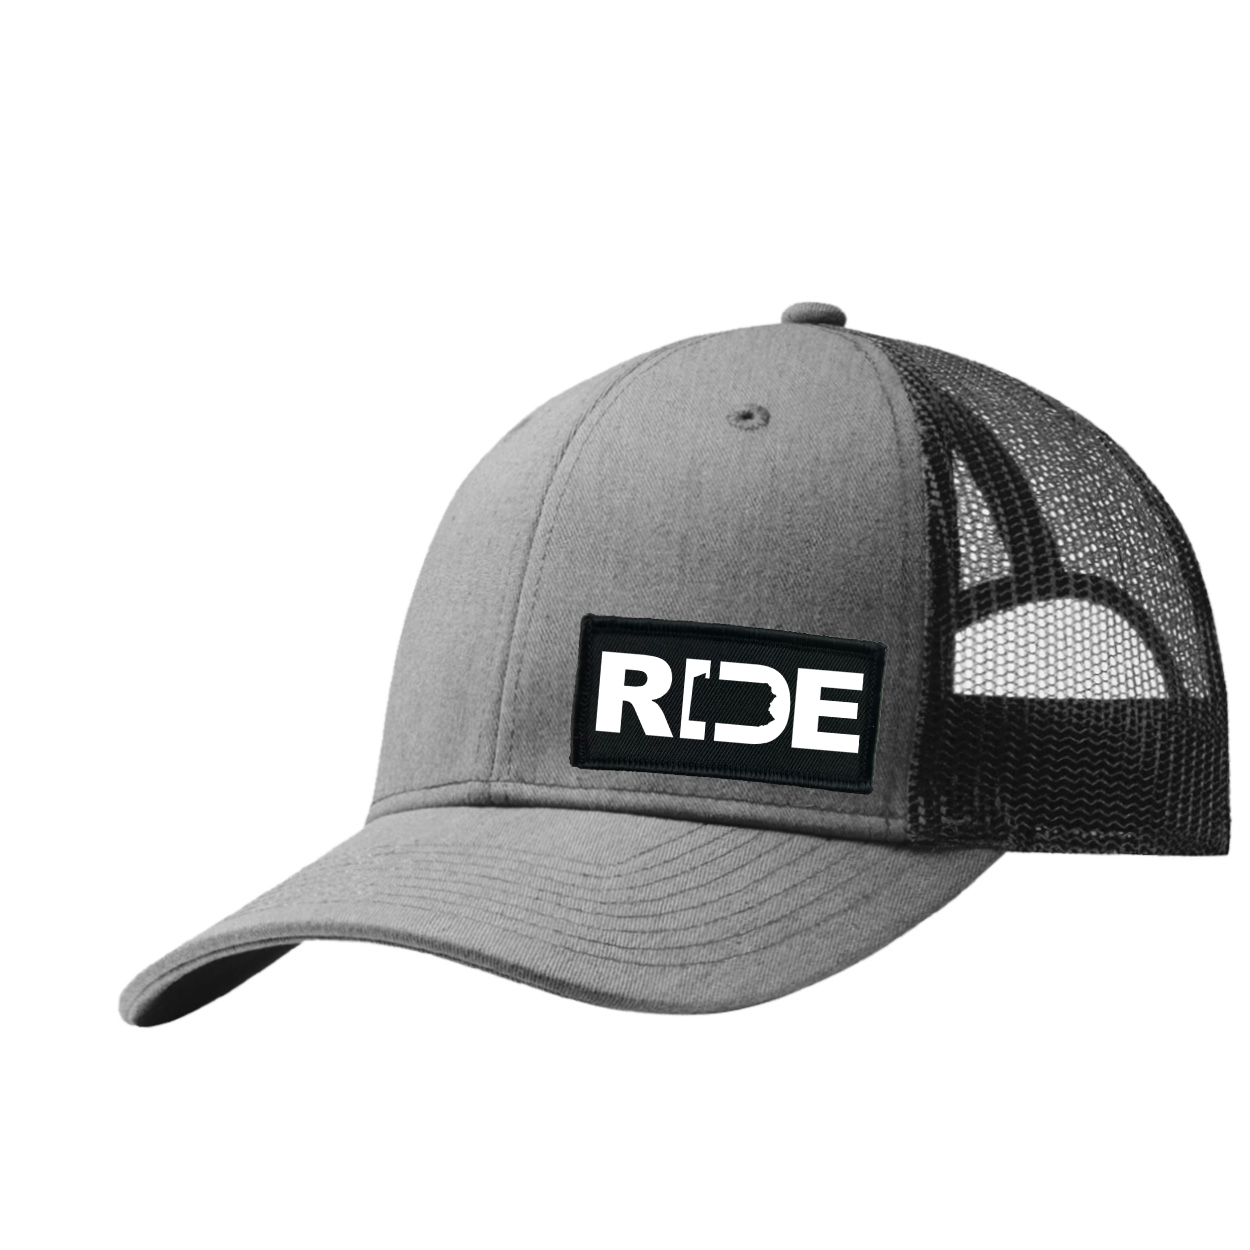 Ride Pennsylvania Night Out Woven Patch Snapback Trucker Hat Heather Gray/Black (White Logo)